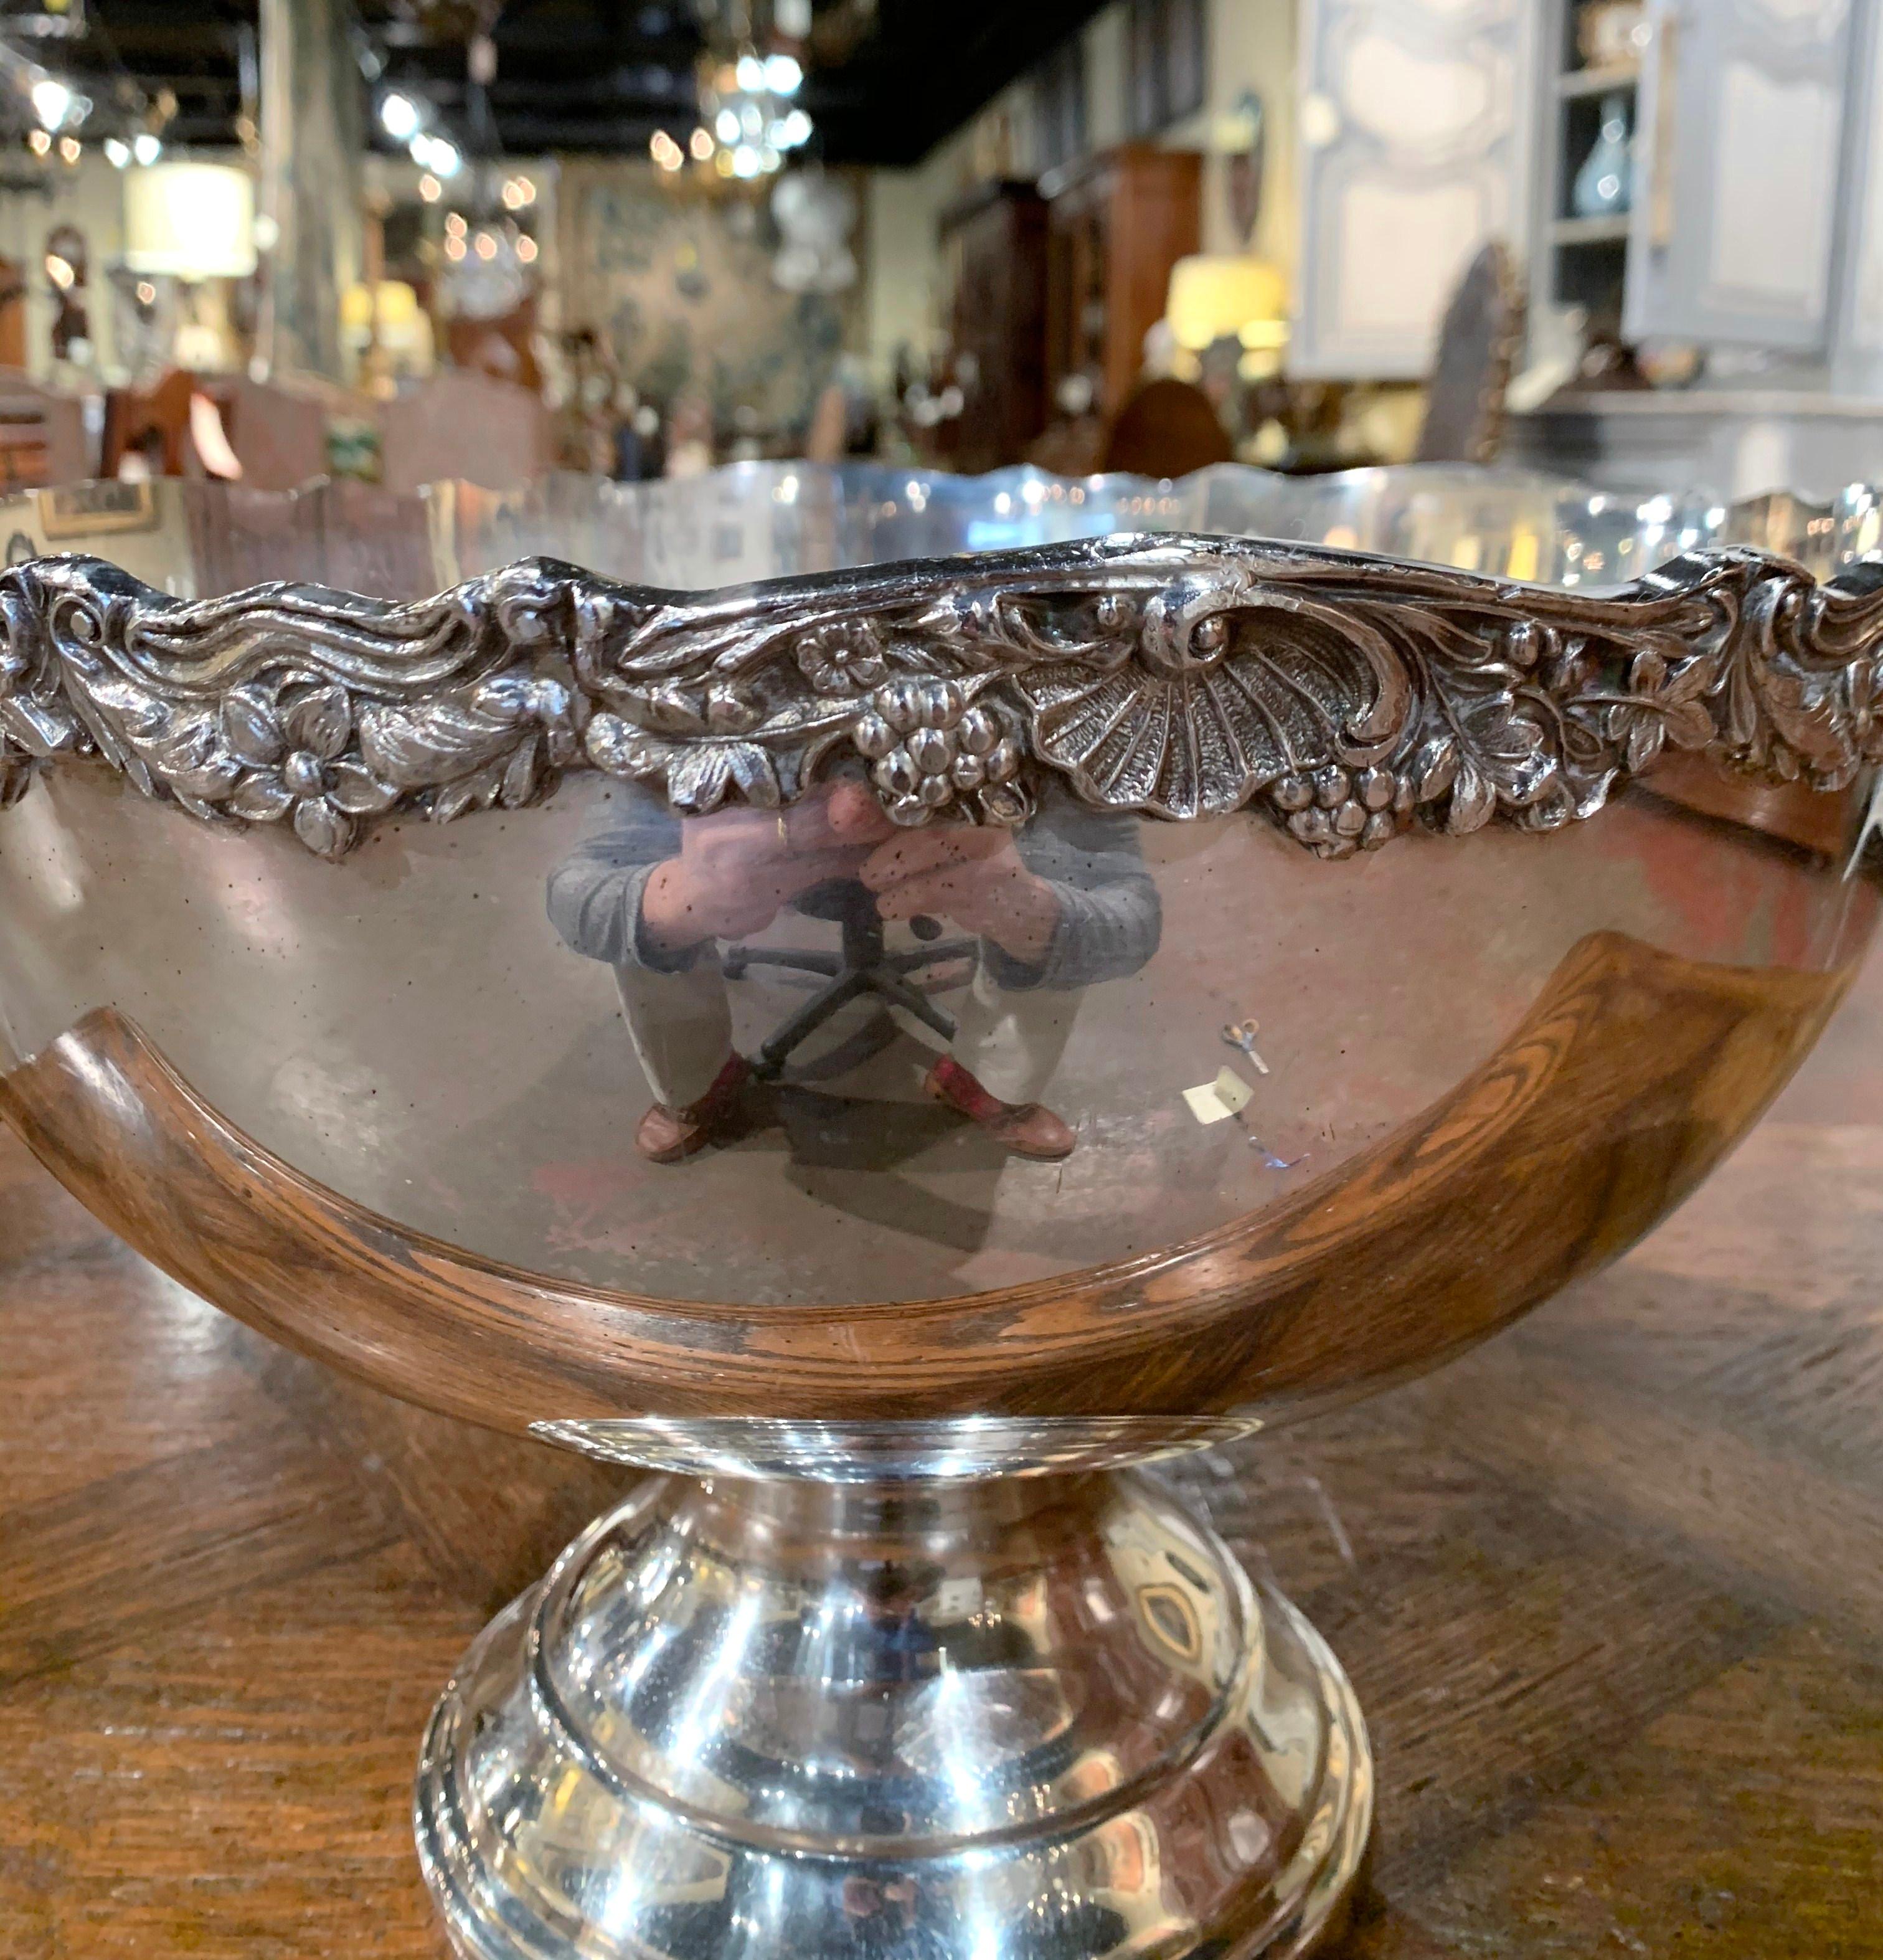 Silvered Mid-20th Century French Silver Plated Wine Cooler Bowl with Grape & Floral Decor